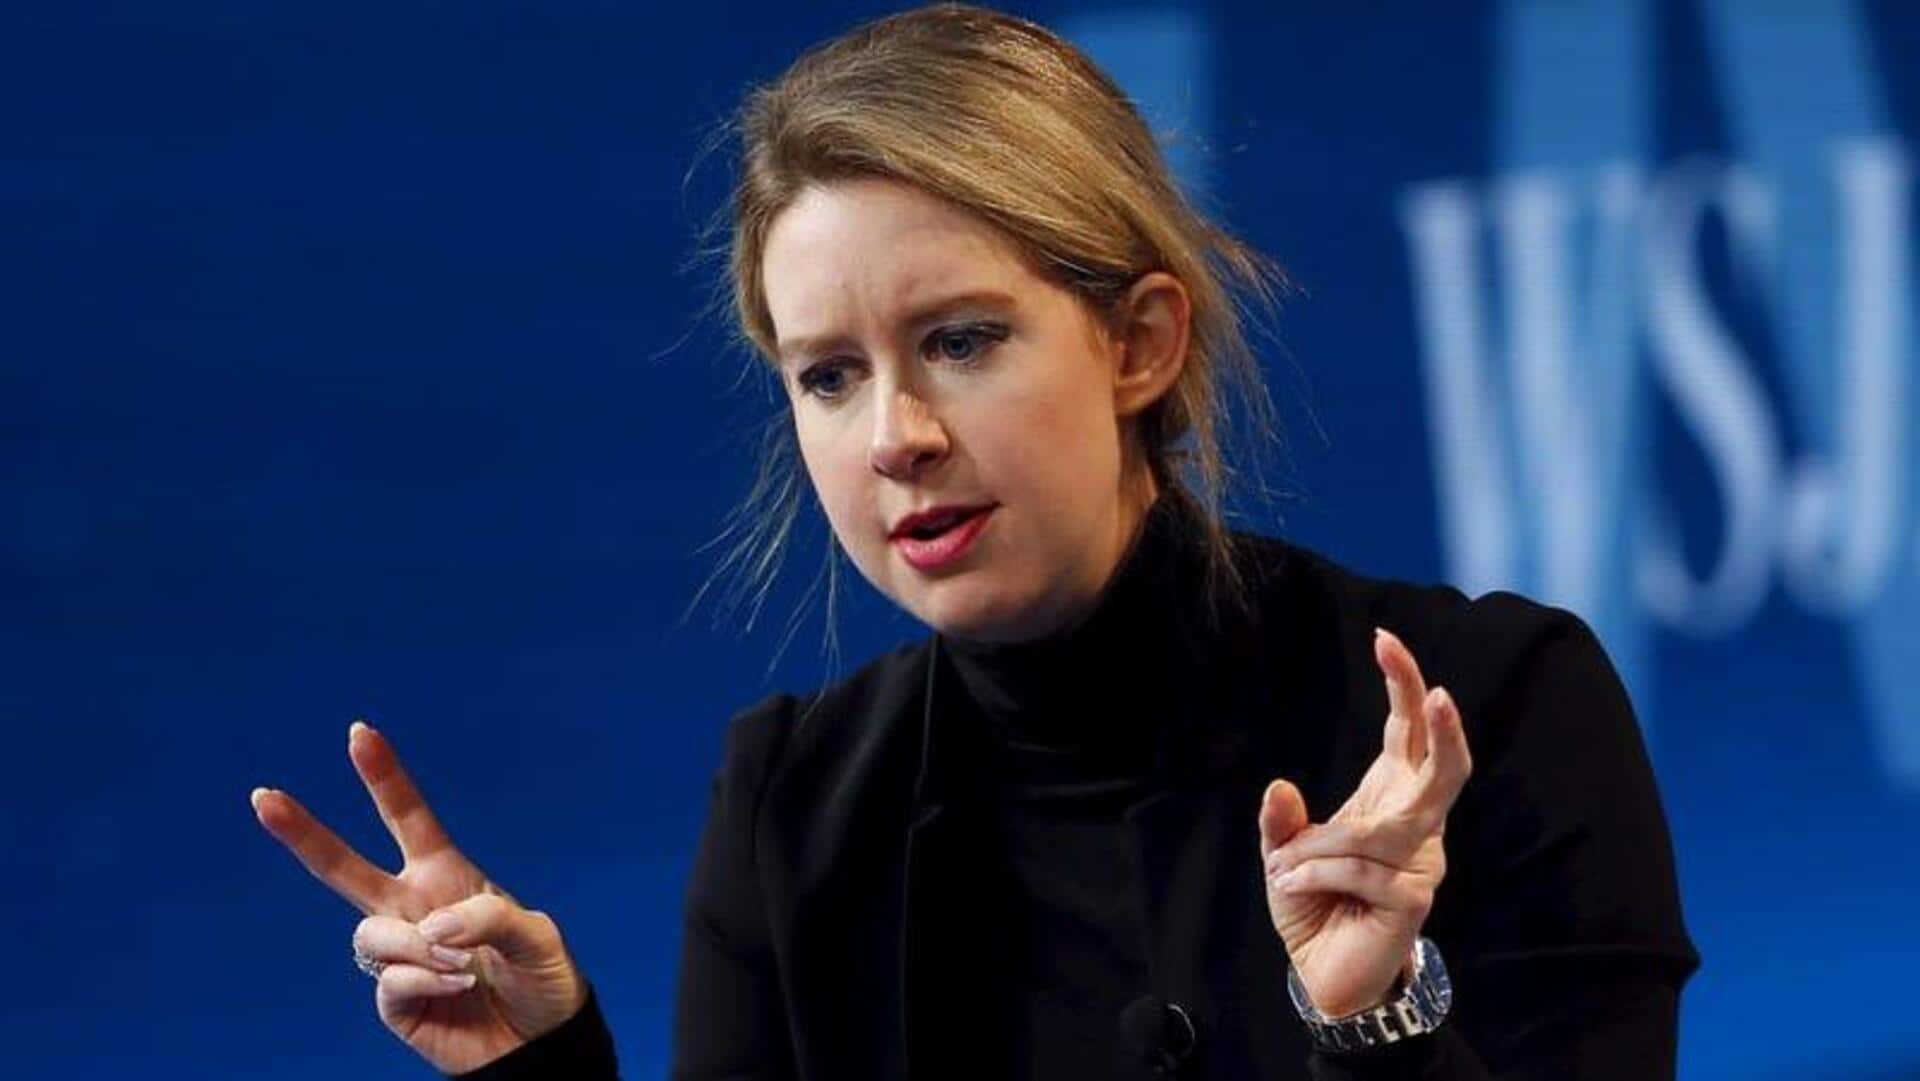 Theranos founder Elizabeth Holmes appeals against fraud conviction in US